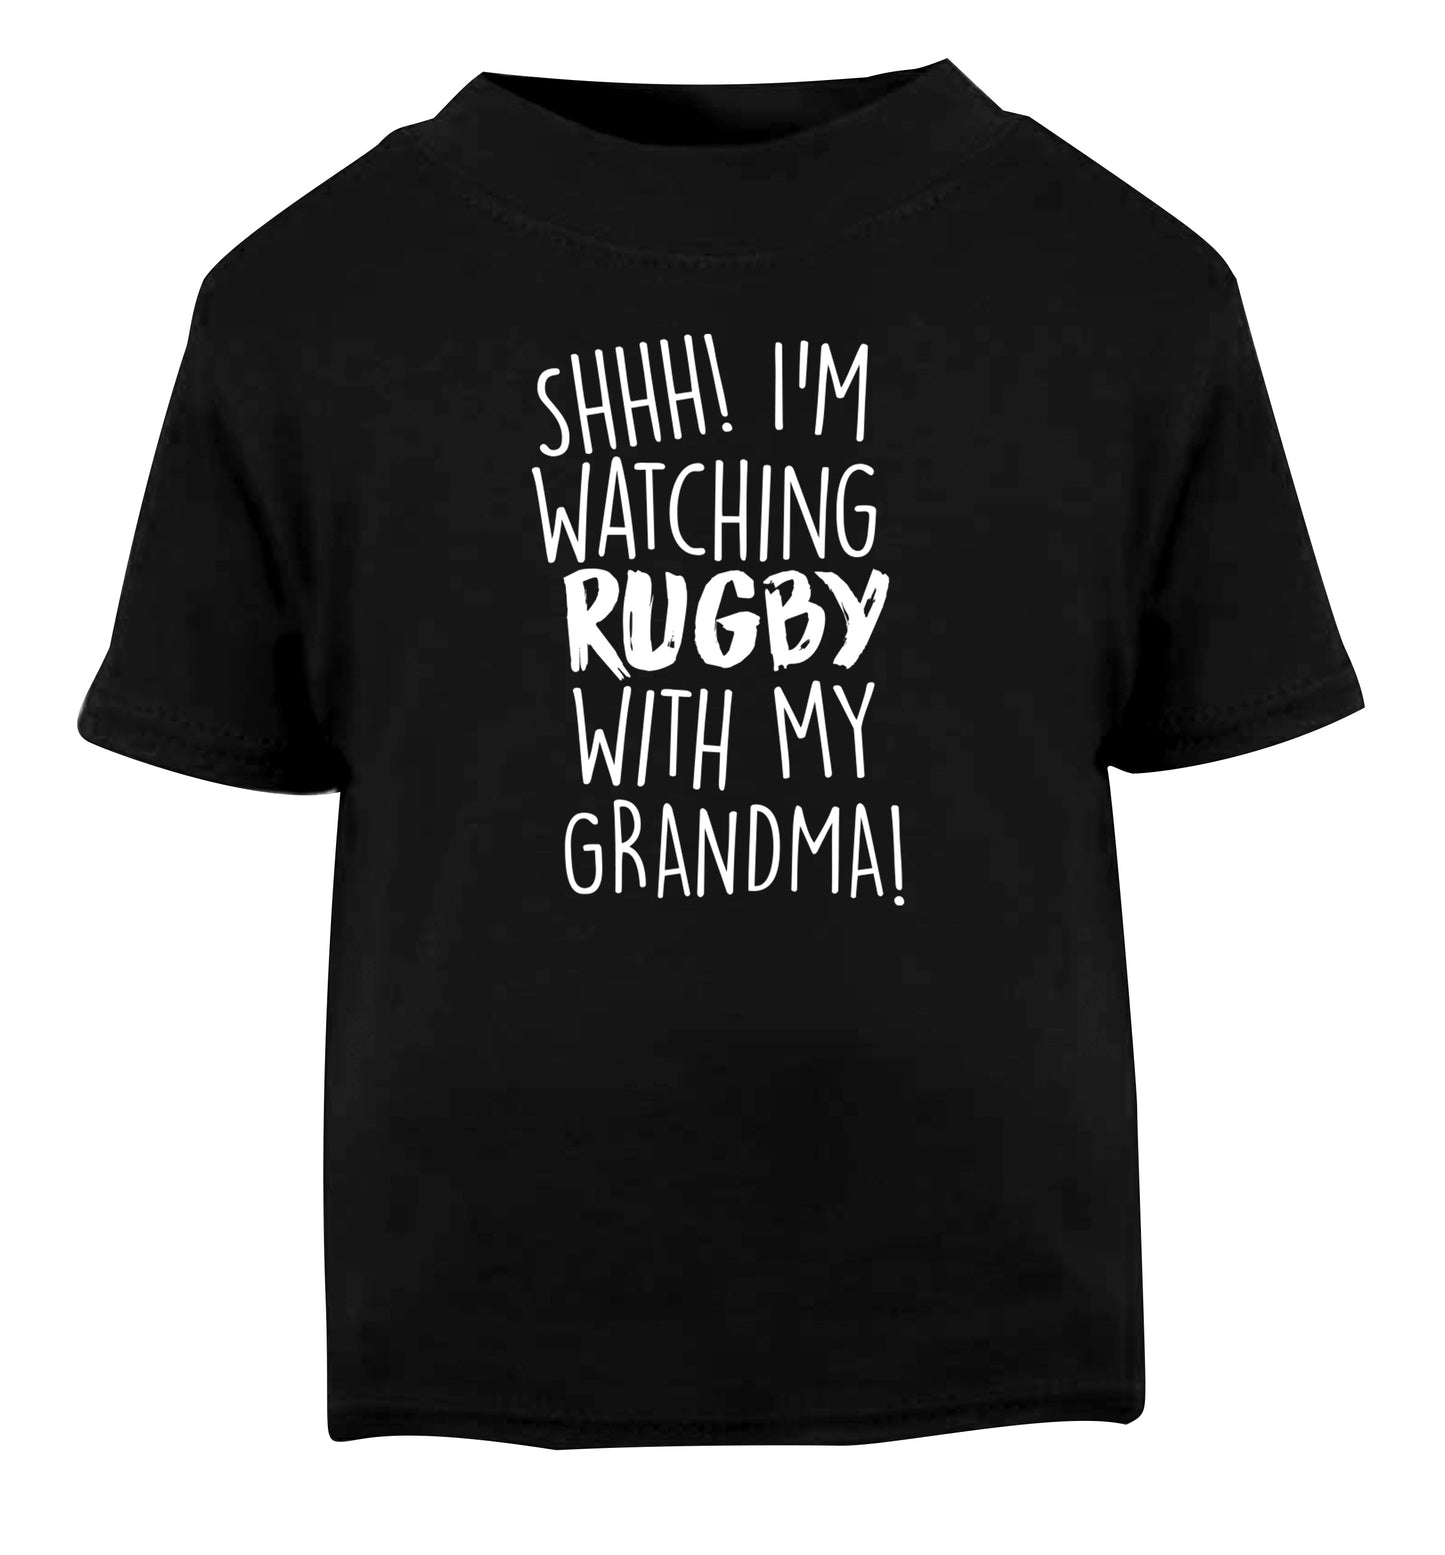 Shh I'm watching rugby with my grandma Black Baby Toddler Tshirt 2 years